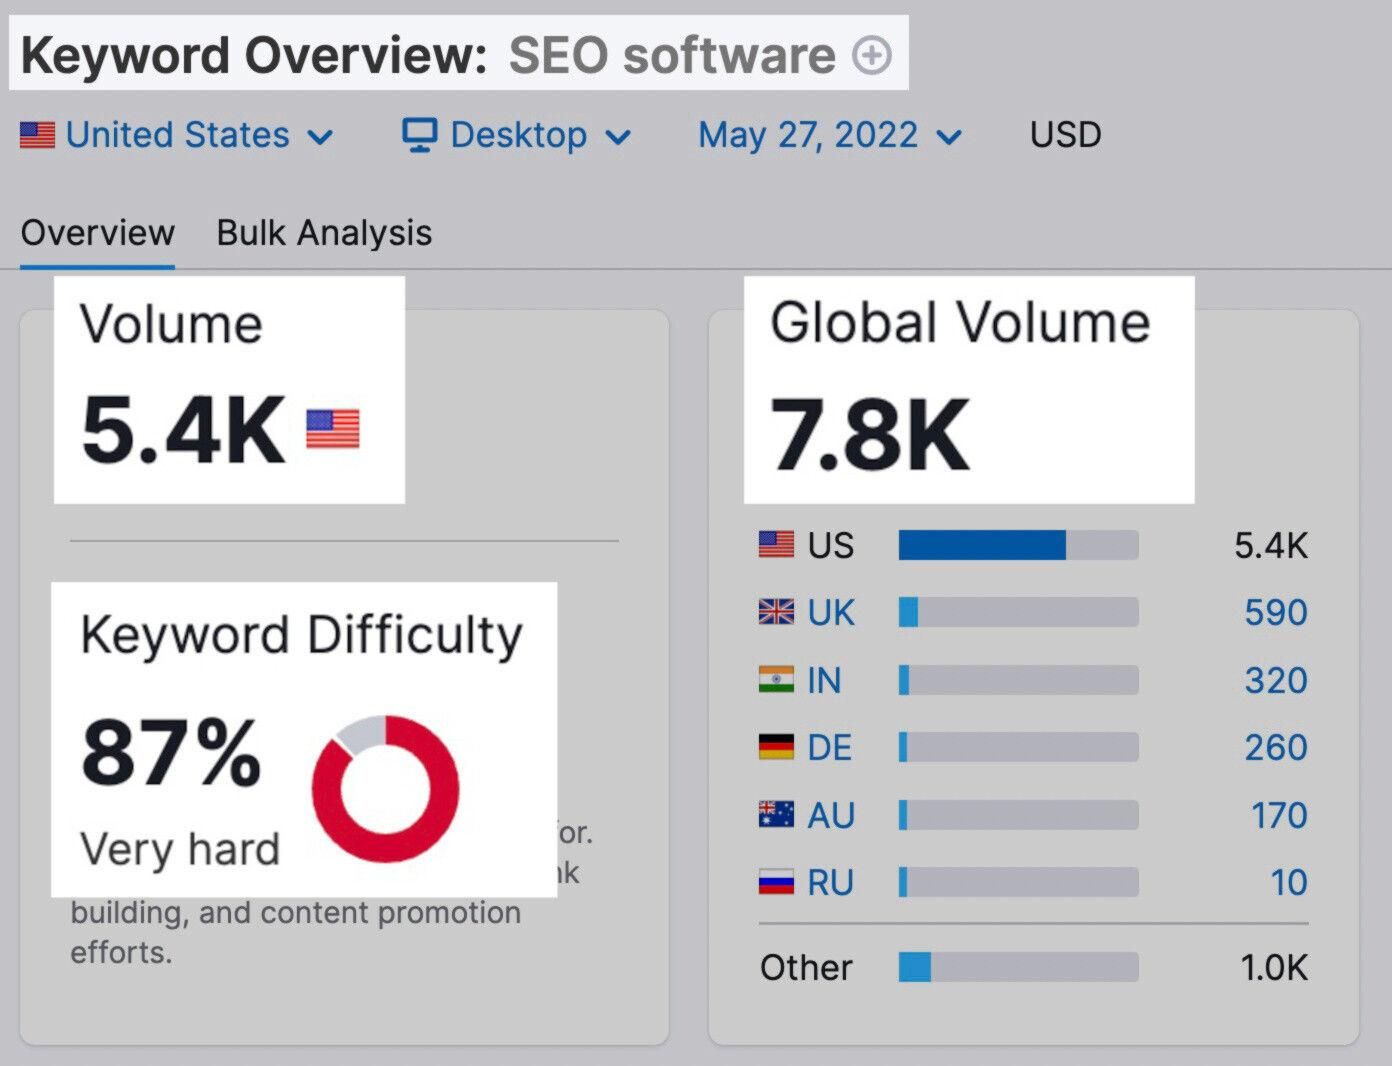 Keyword Overview for "SEO software"